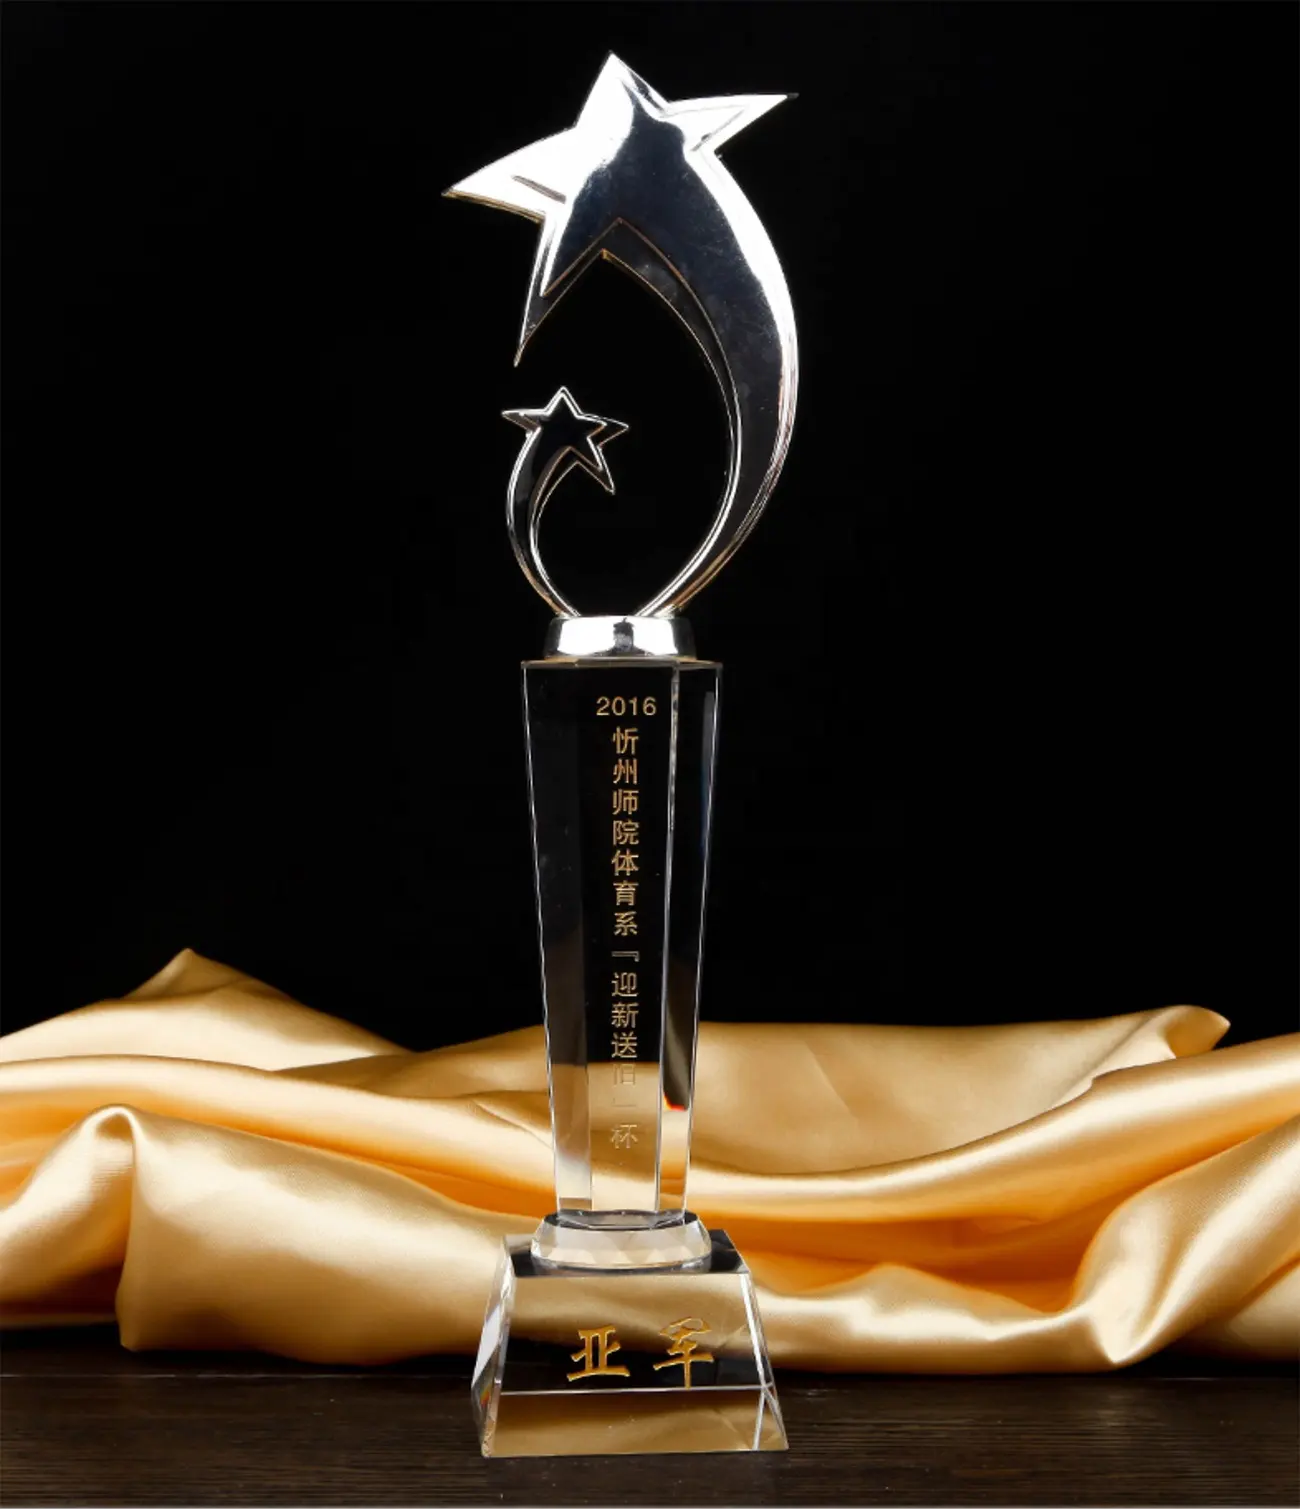 New Design Golden Star Trophy Awards Carved Metal with Engraving on Transparent Crystal Glass Base Souvenir Gifts Wholesales